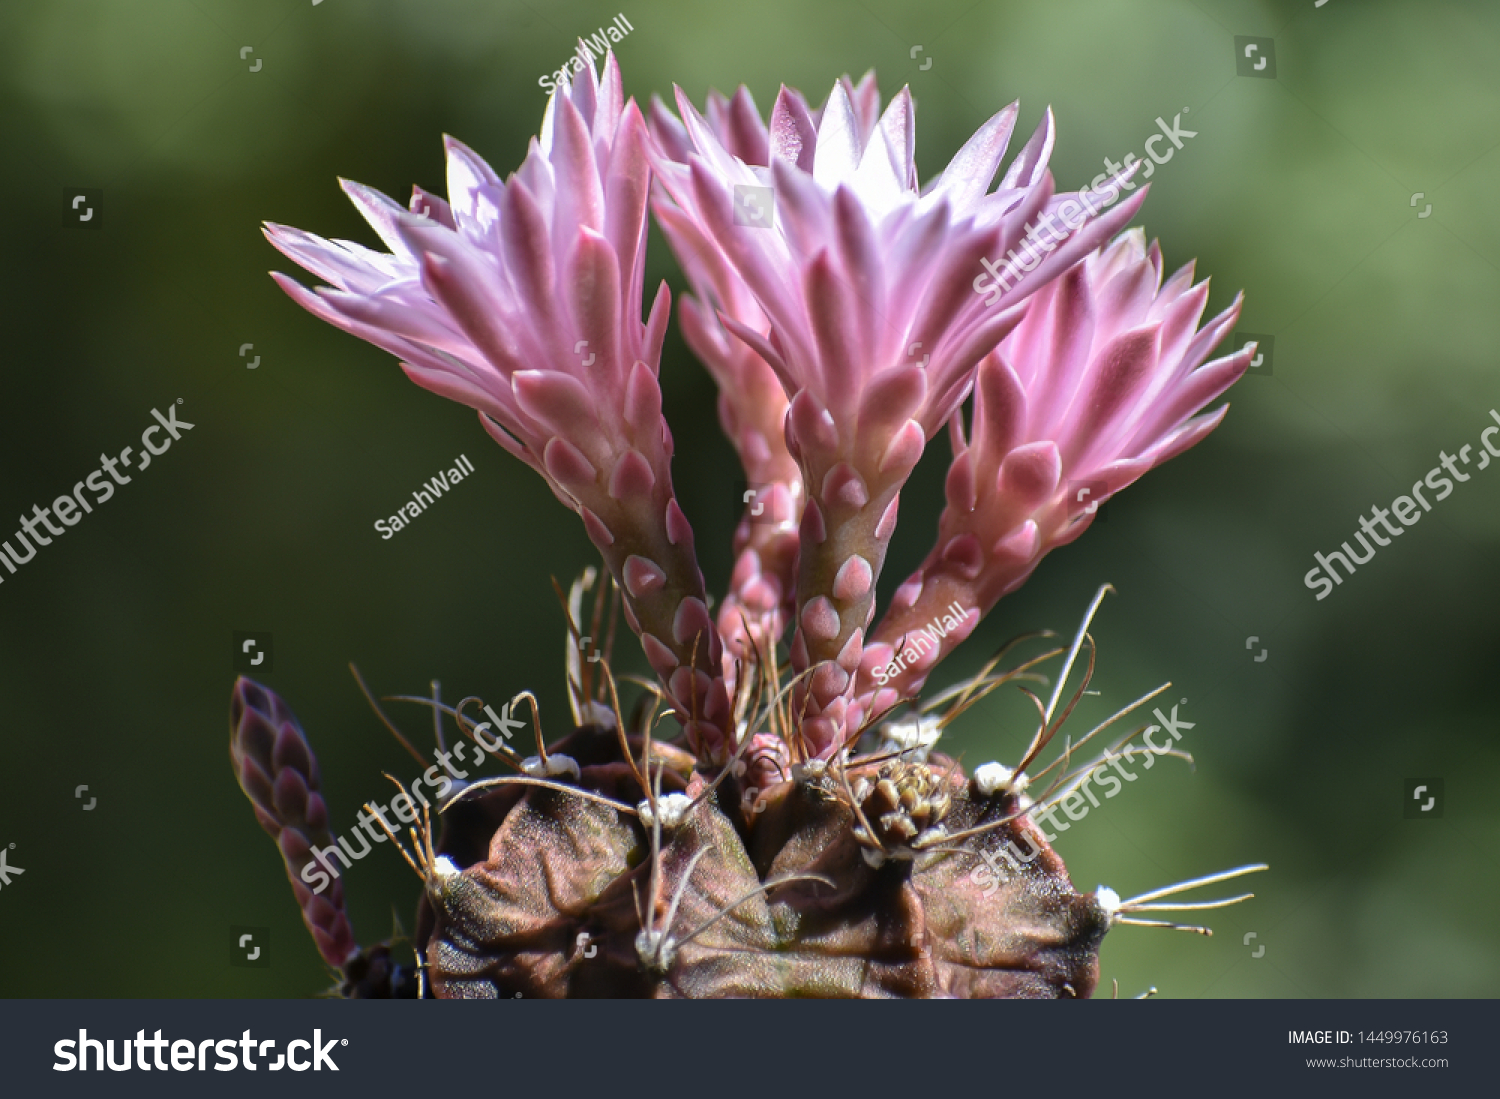 Close up of pink cactus flowers #1449976163